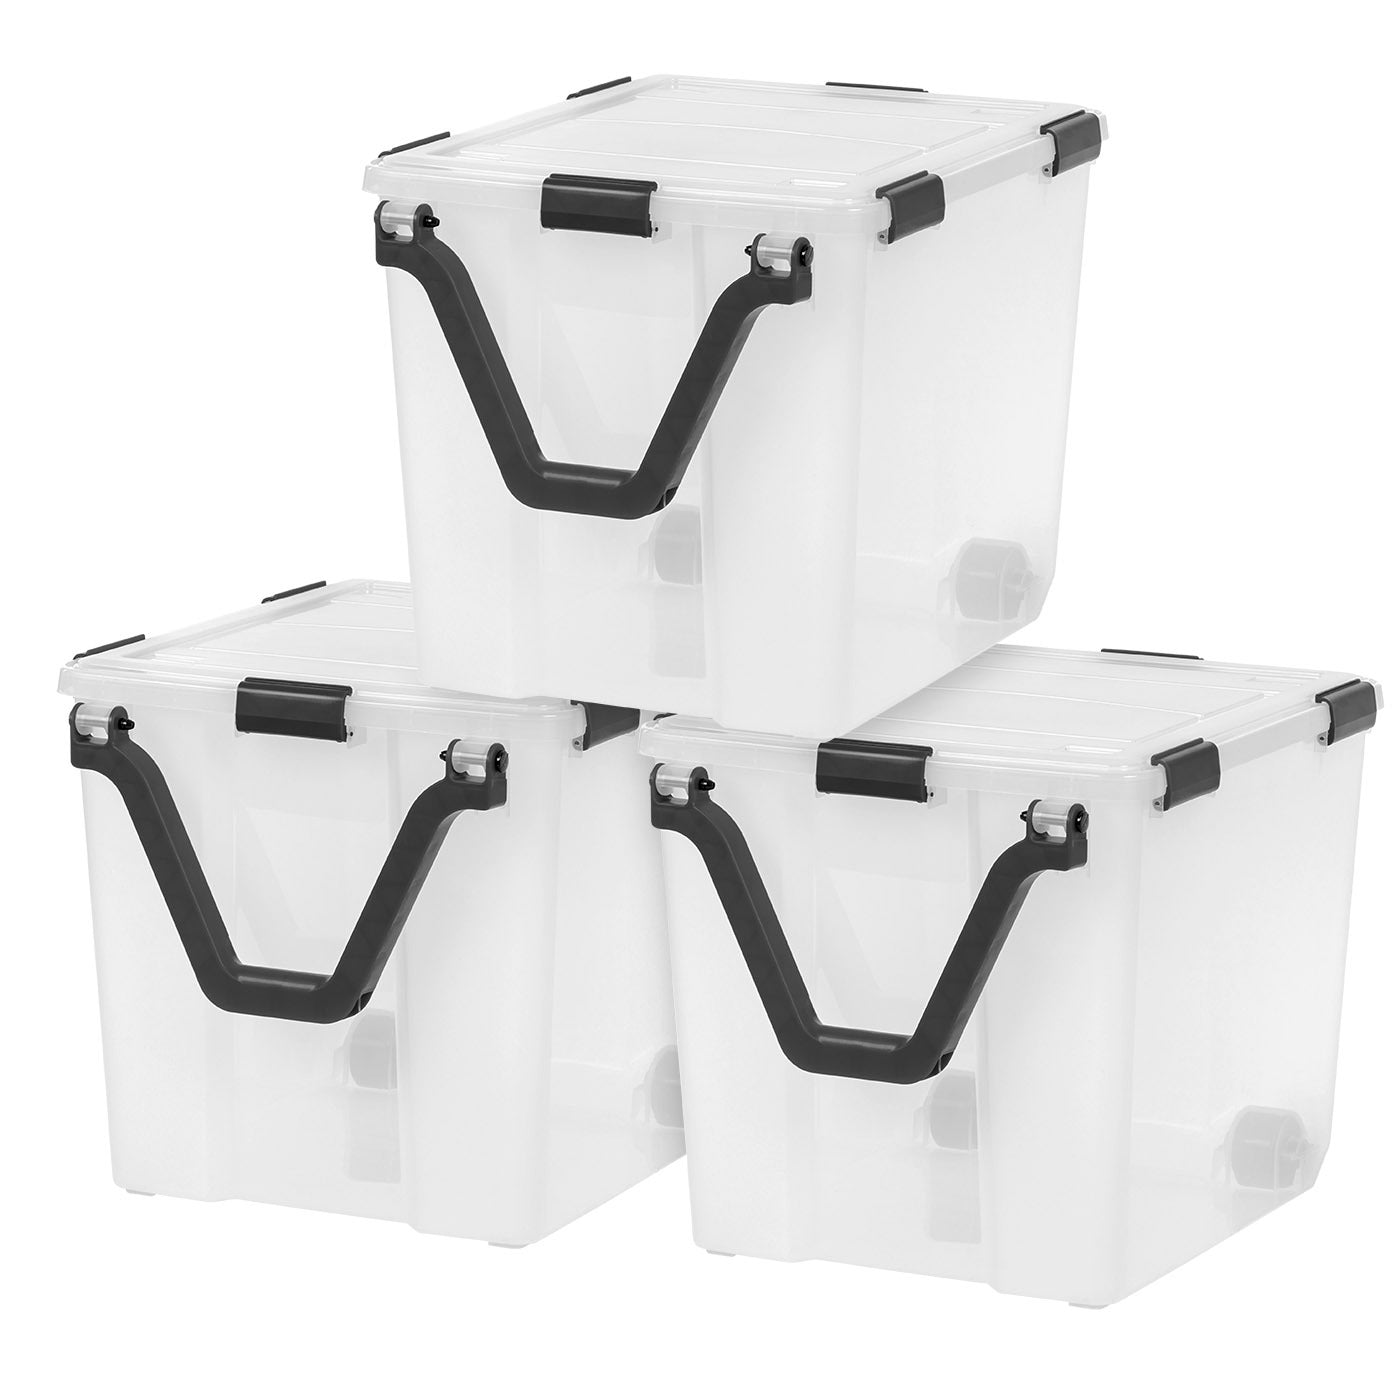 Mount It! Work It! Heavy Duty Plastic Storage Containers, 60 Liters,  Black/Yellow, Case Of 3 Bins